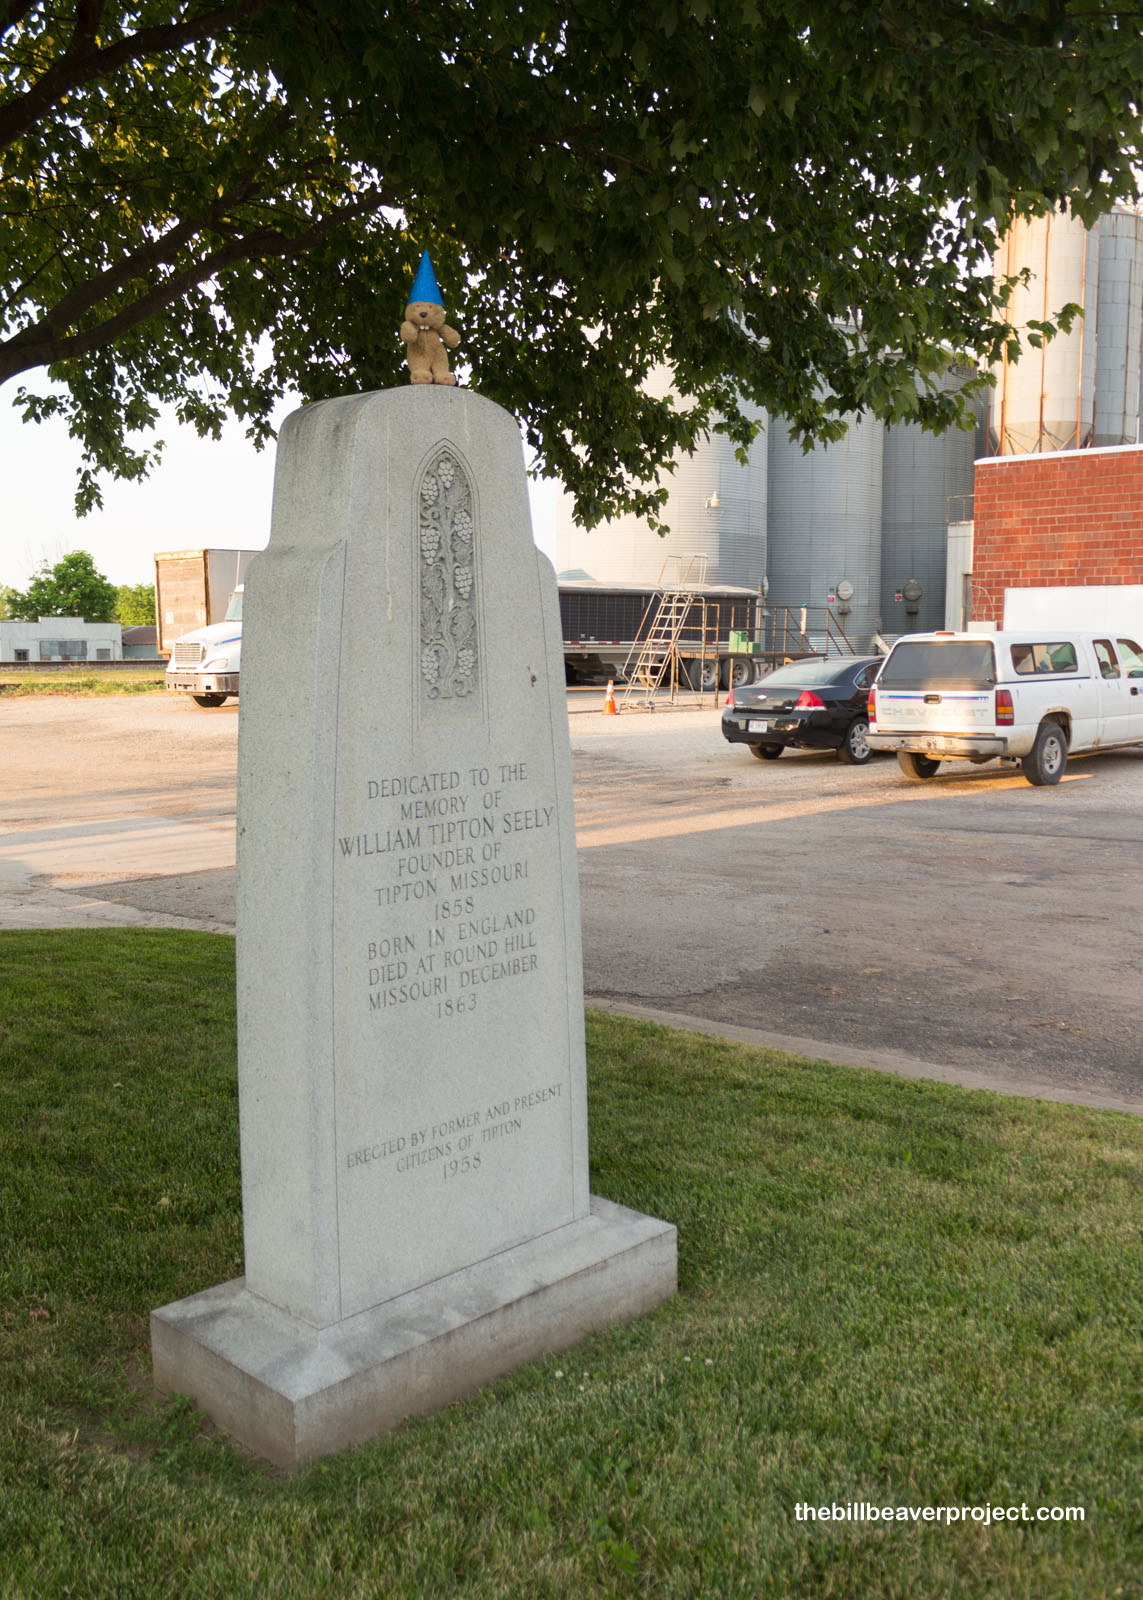 A memorial to town founder, William Tipton Seeley!